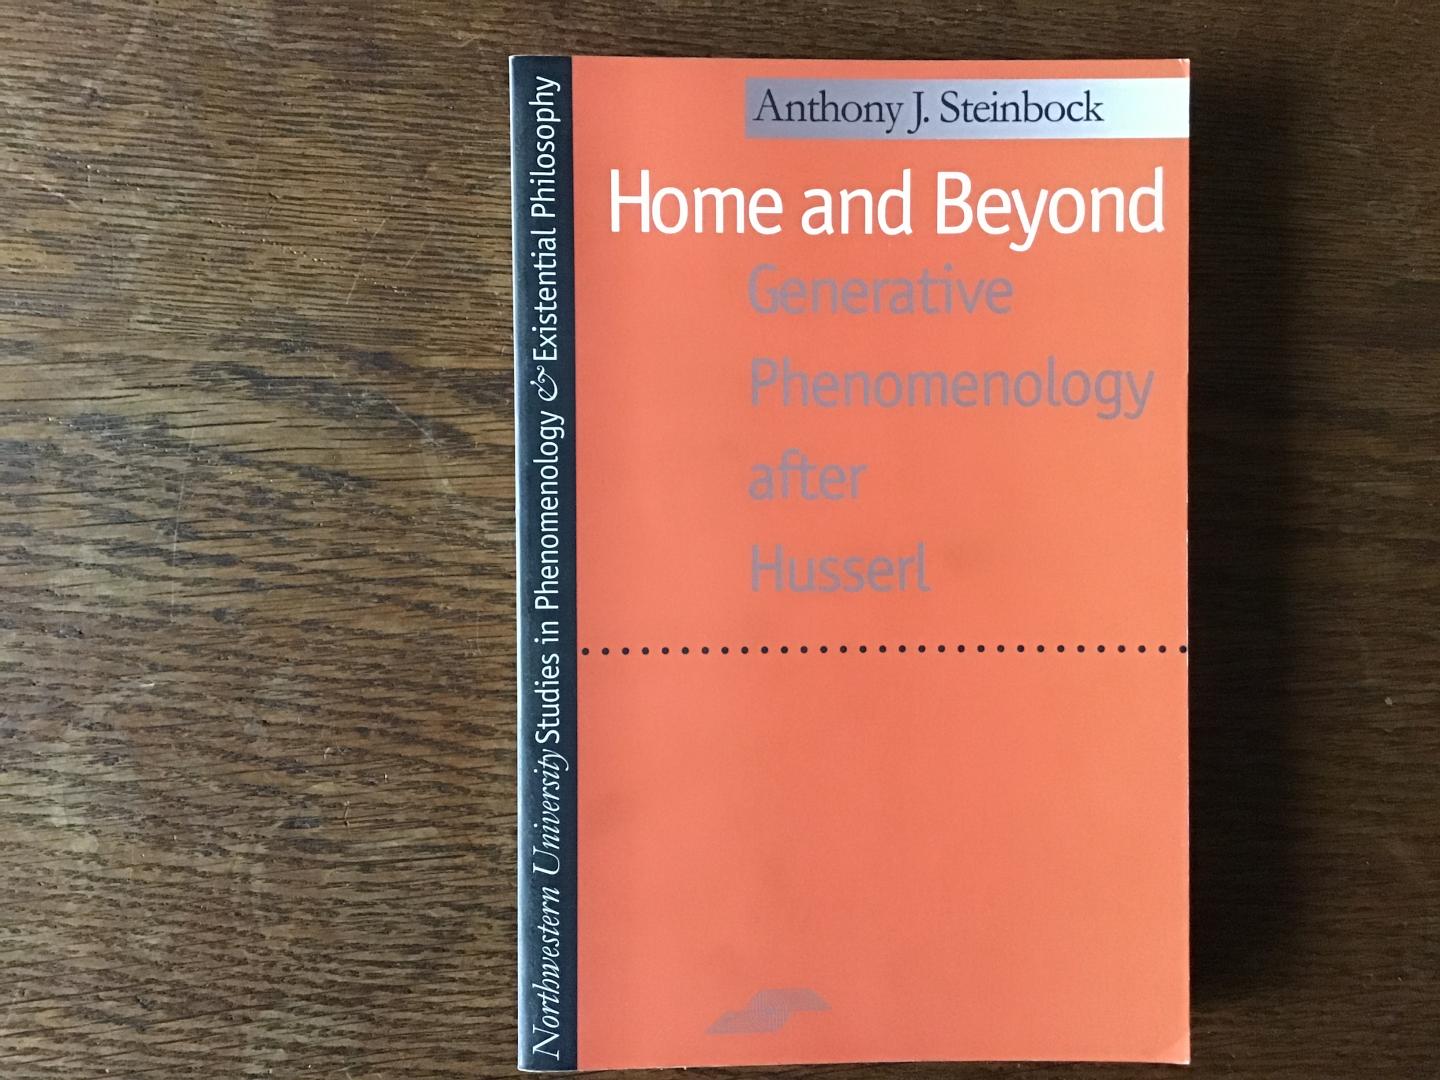 Anthony J. Steinbock - Home and Beyond / Generative Phenomenology After Husserl